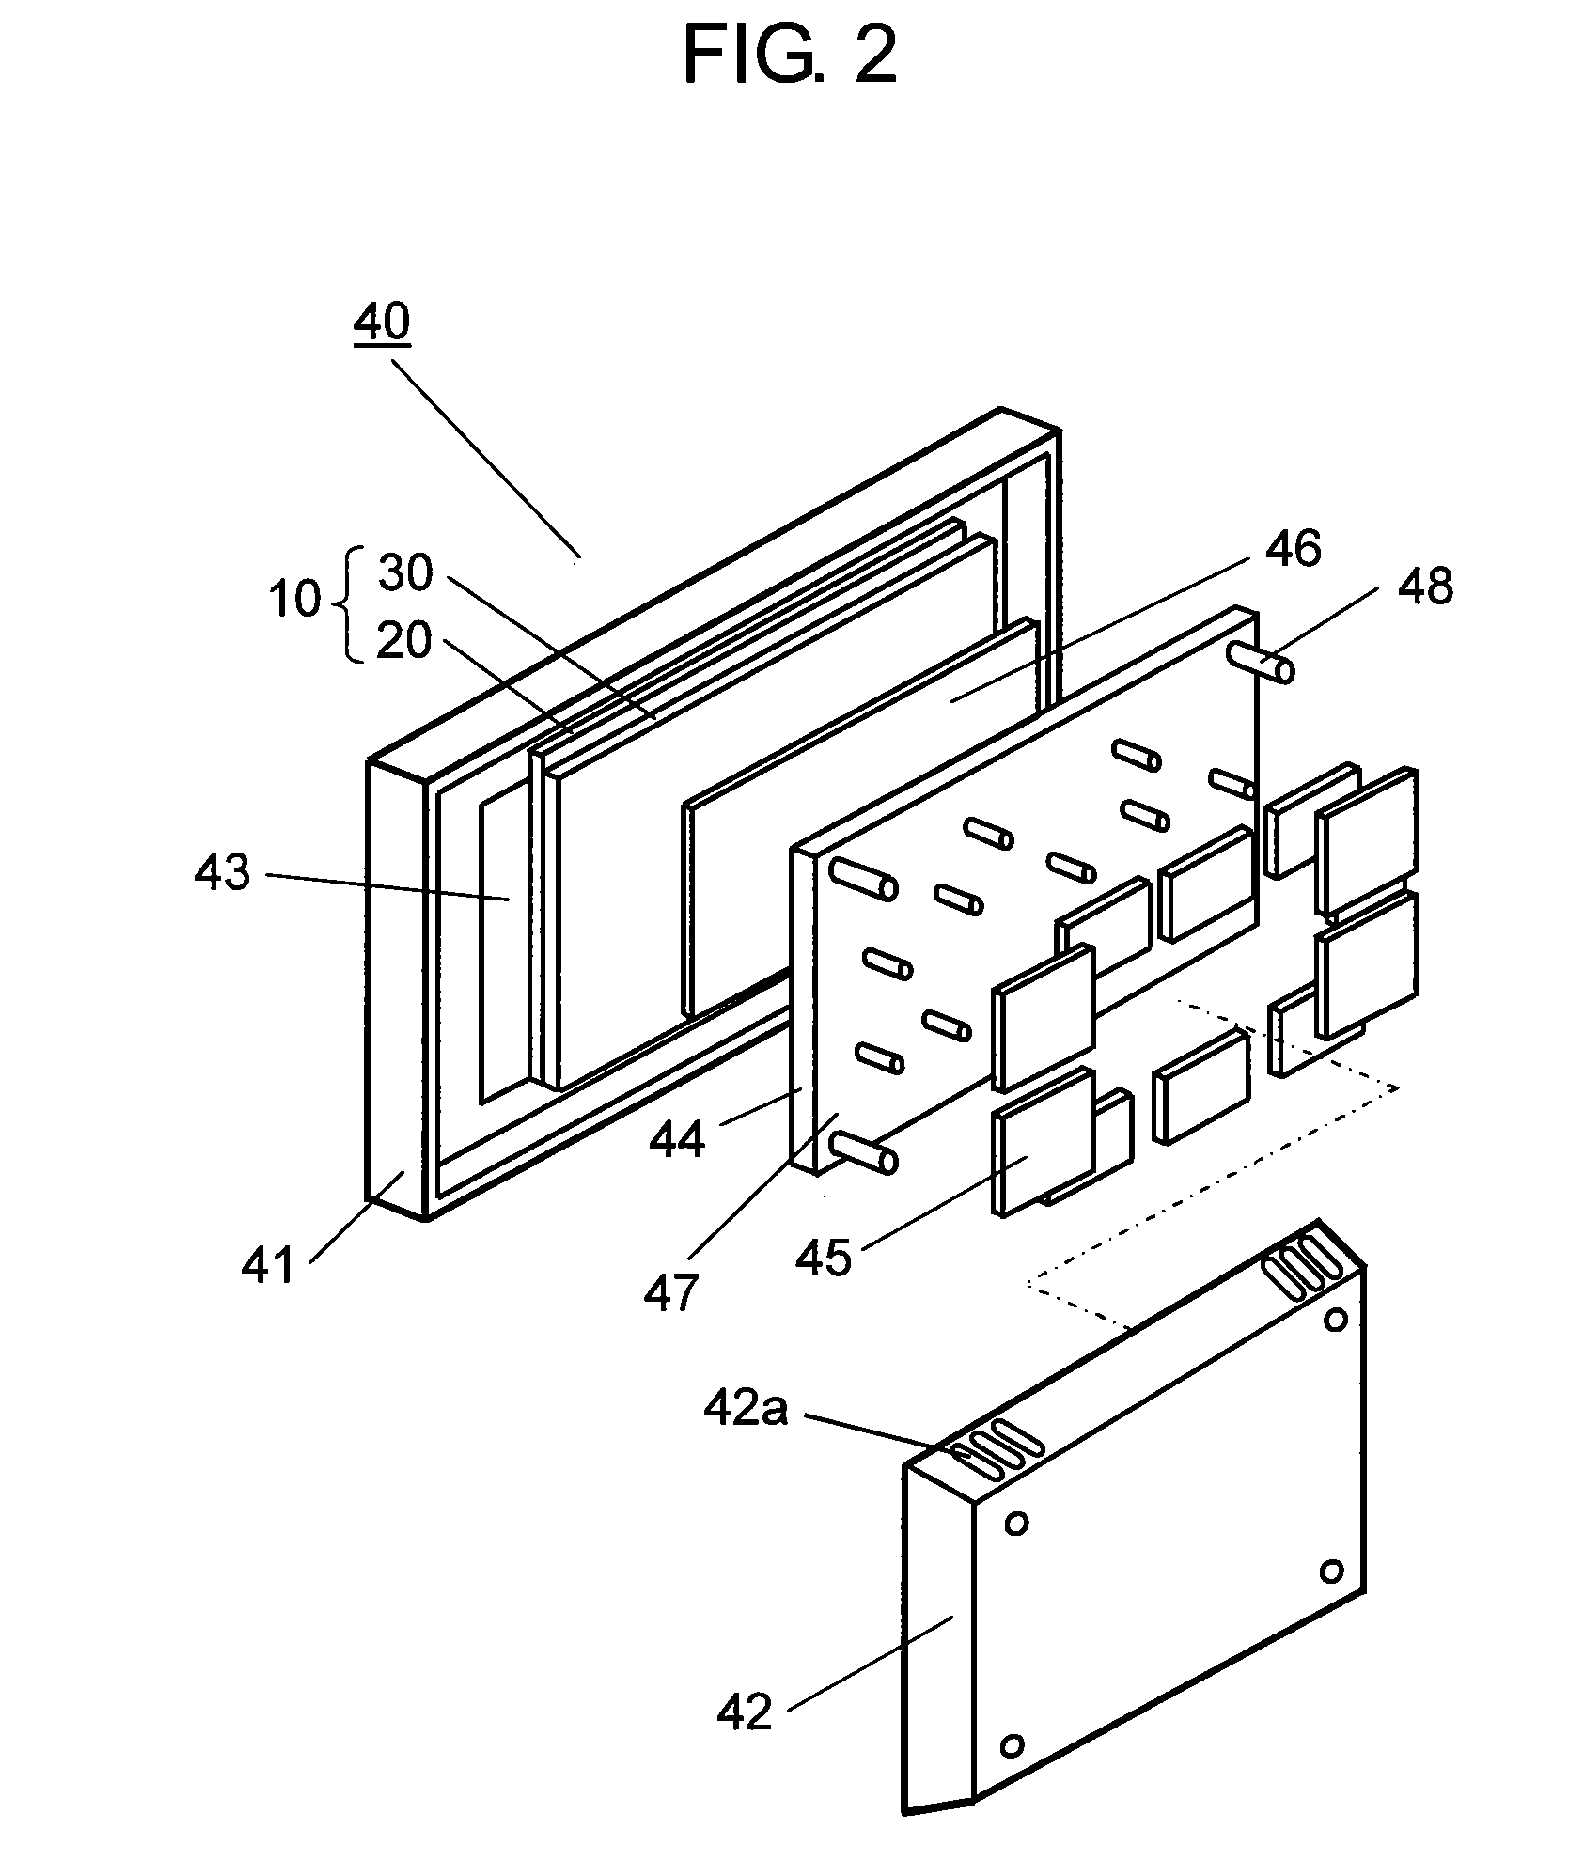 Method and apparatus for disassembling display device